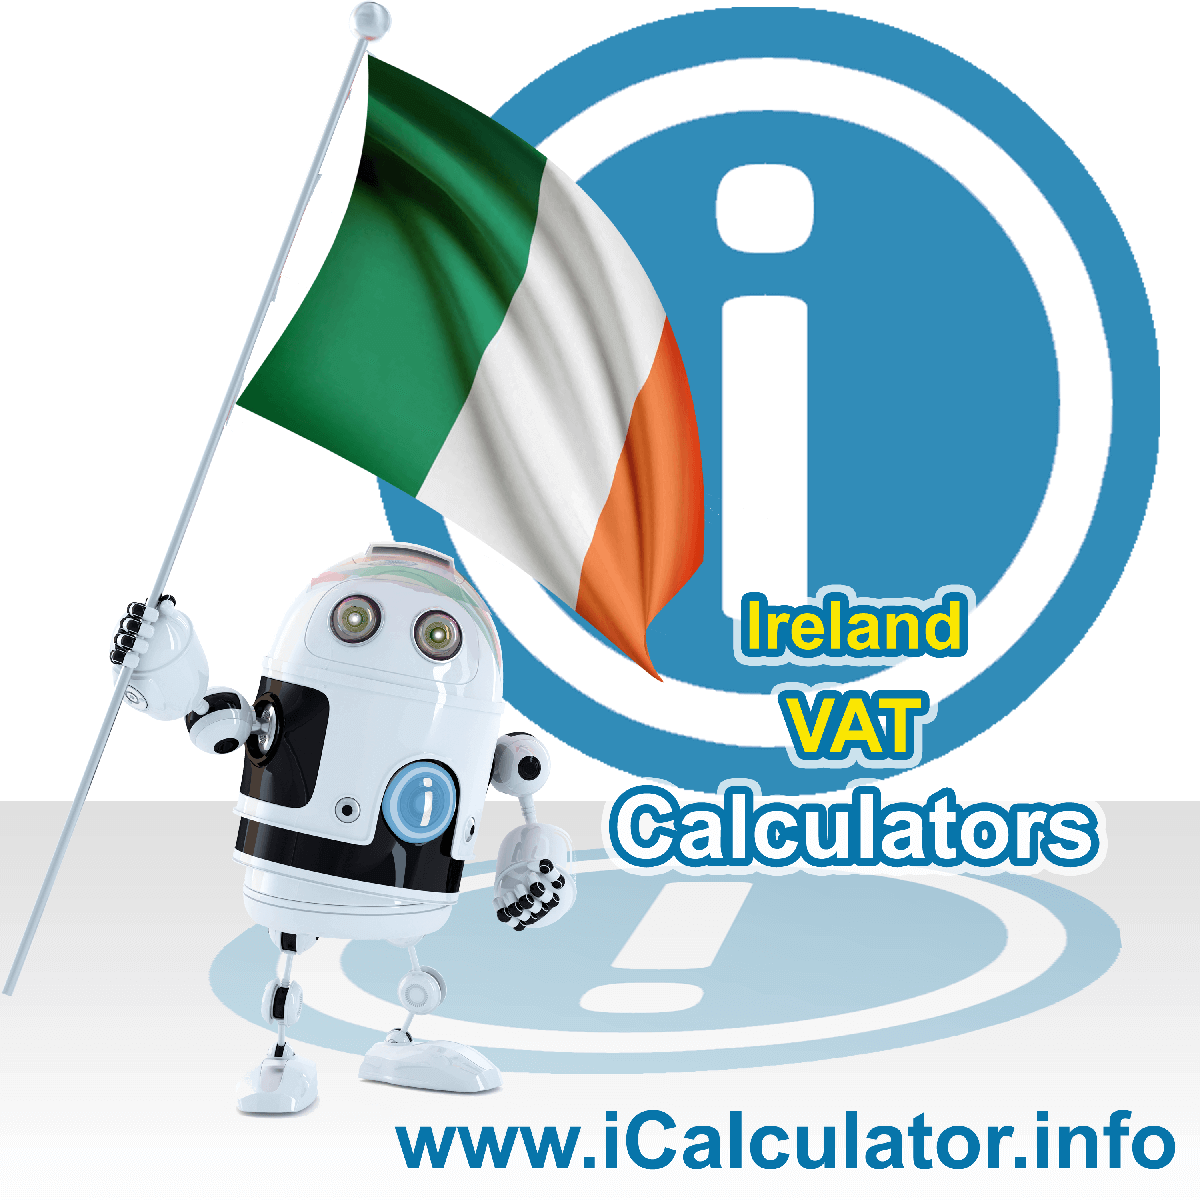 Ireland VAT Calculator. This image shows the Ireland flag and information relating to the VAT formula used for calculating Value Added Tax in Ireland using the Ireland VAT Calculator in 2023